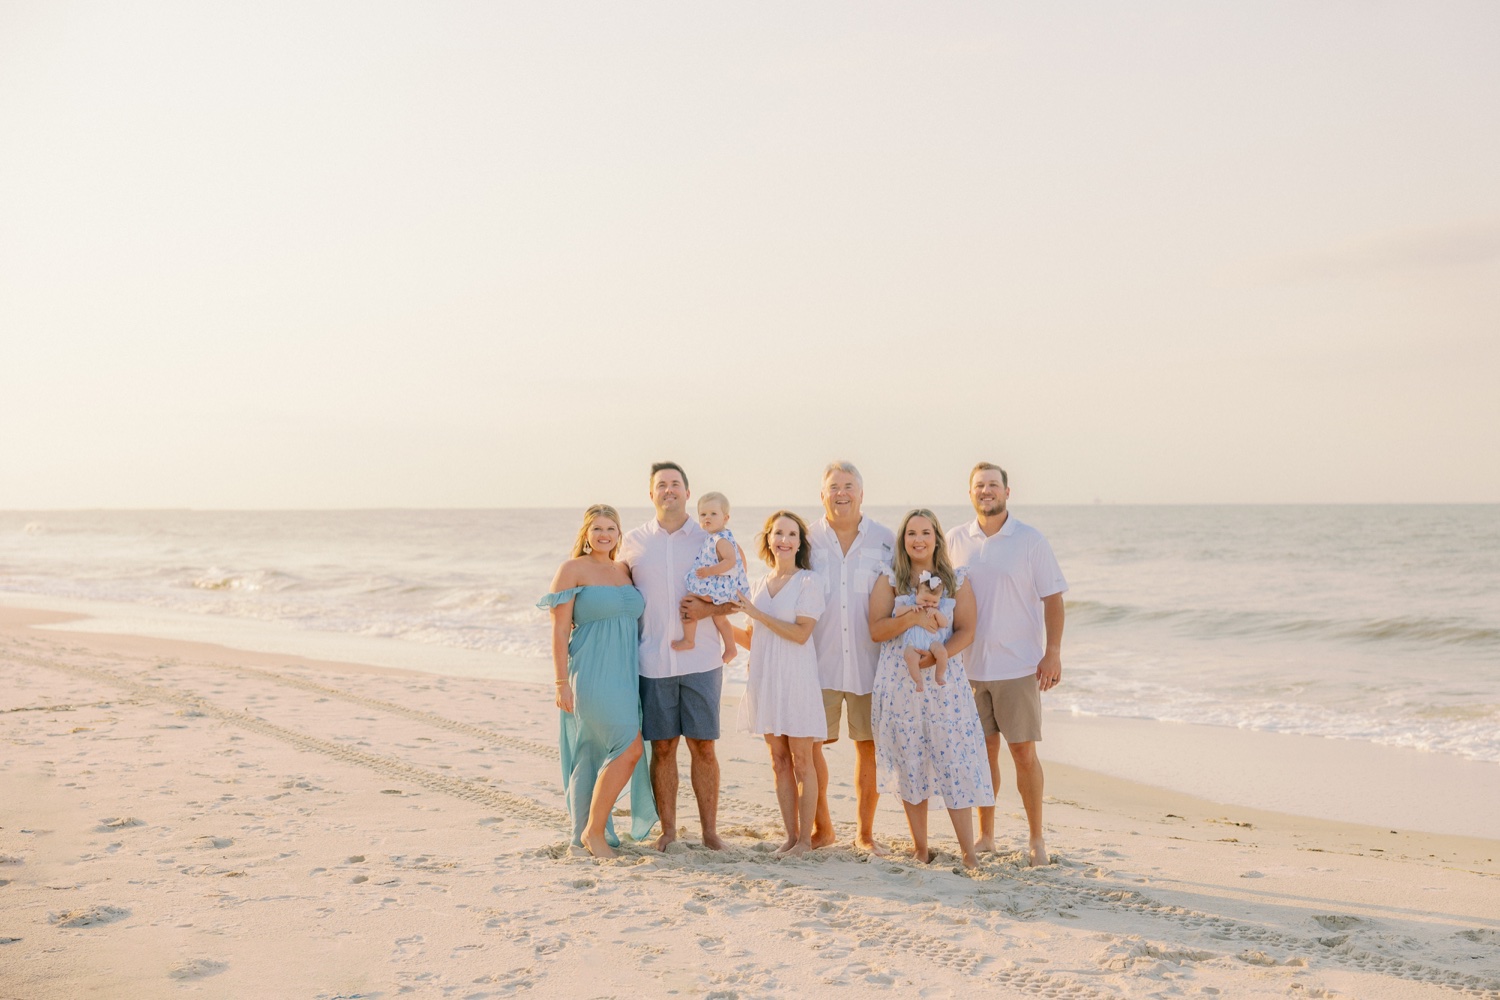 An endearing snapshot of the Yancey family, gathered on Dauphin Island. The morning sunlight bathes them as they huddle together sharing smiles, showcasing the genuine warmth and deep bond they share. The serene backdrop of the island enhances the beauty of the moment.